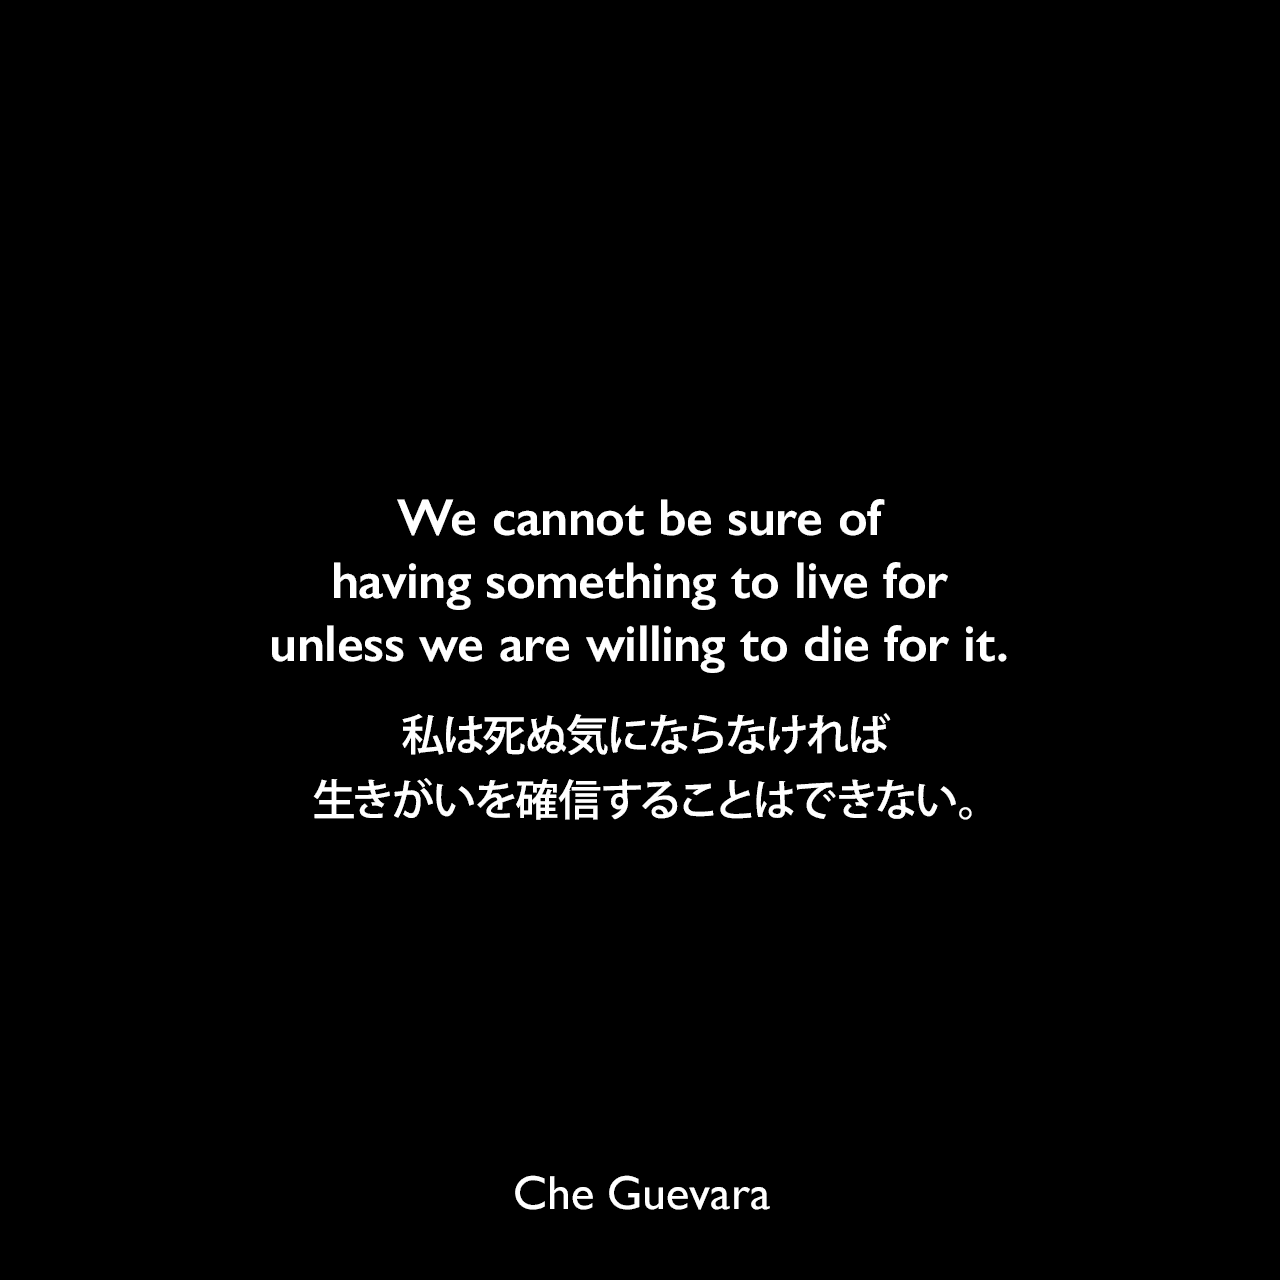 We cannot be sure of having something to live for unless we are willing to die for it.死ぬ気にならなければ、生きがいを確信することはできない。- アーラン・ズロによる本「Wise Guys: Brilliant Thoughts and Big Talk from Real Men」よりChe Guevara